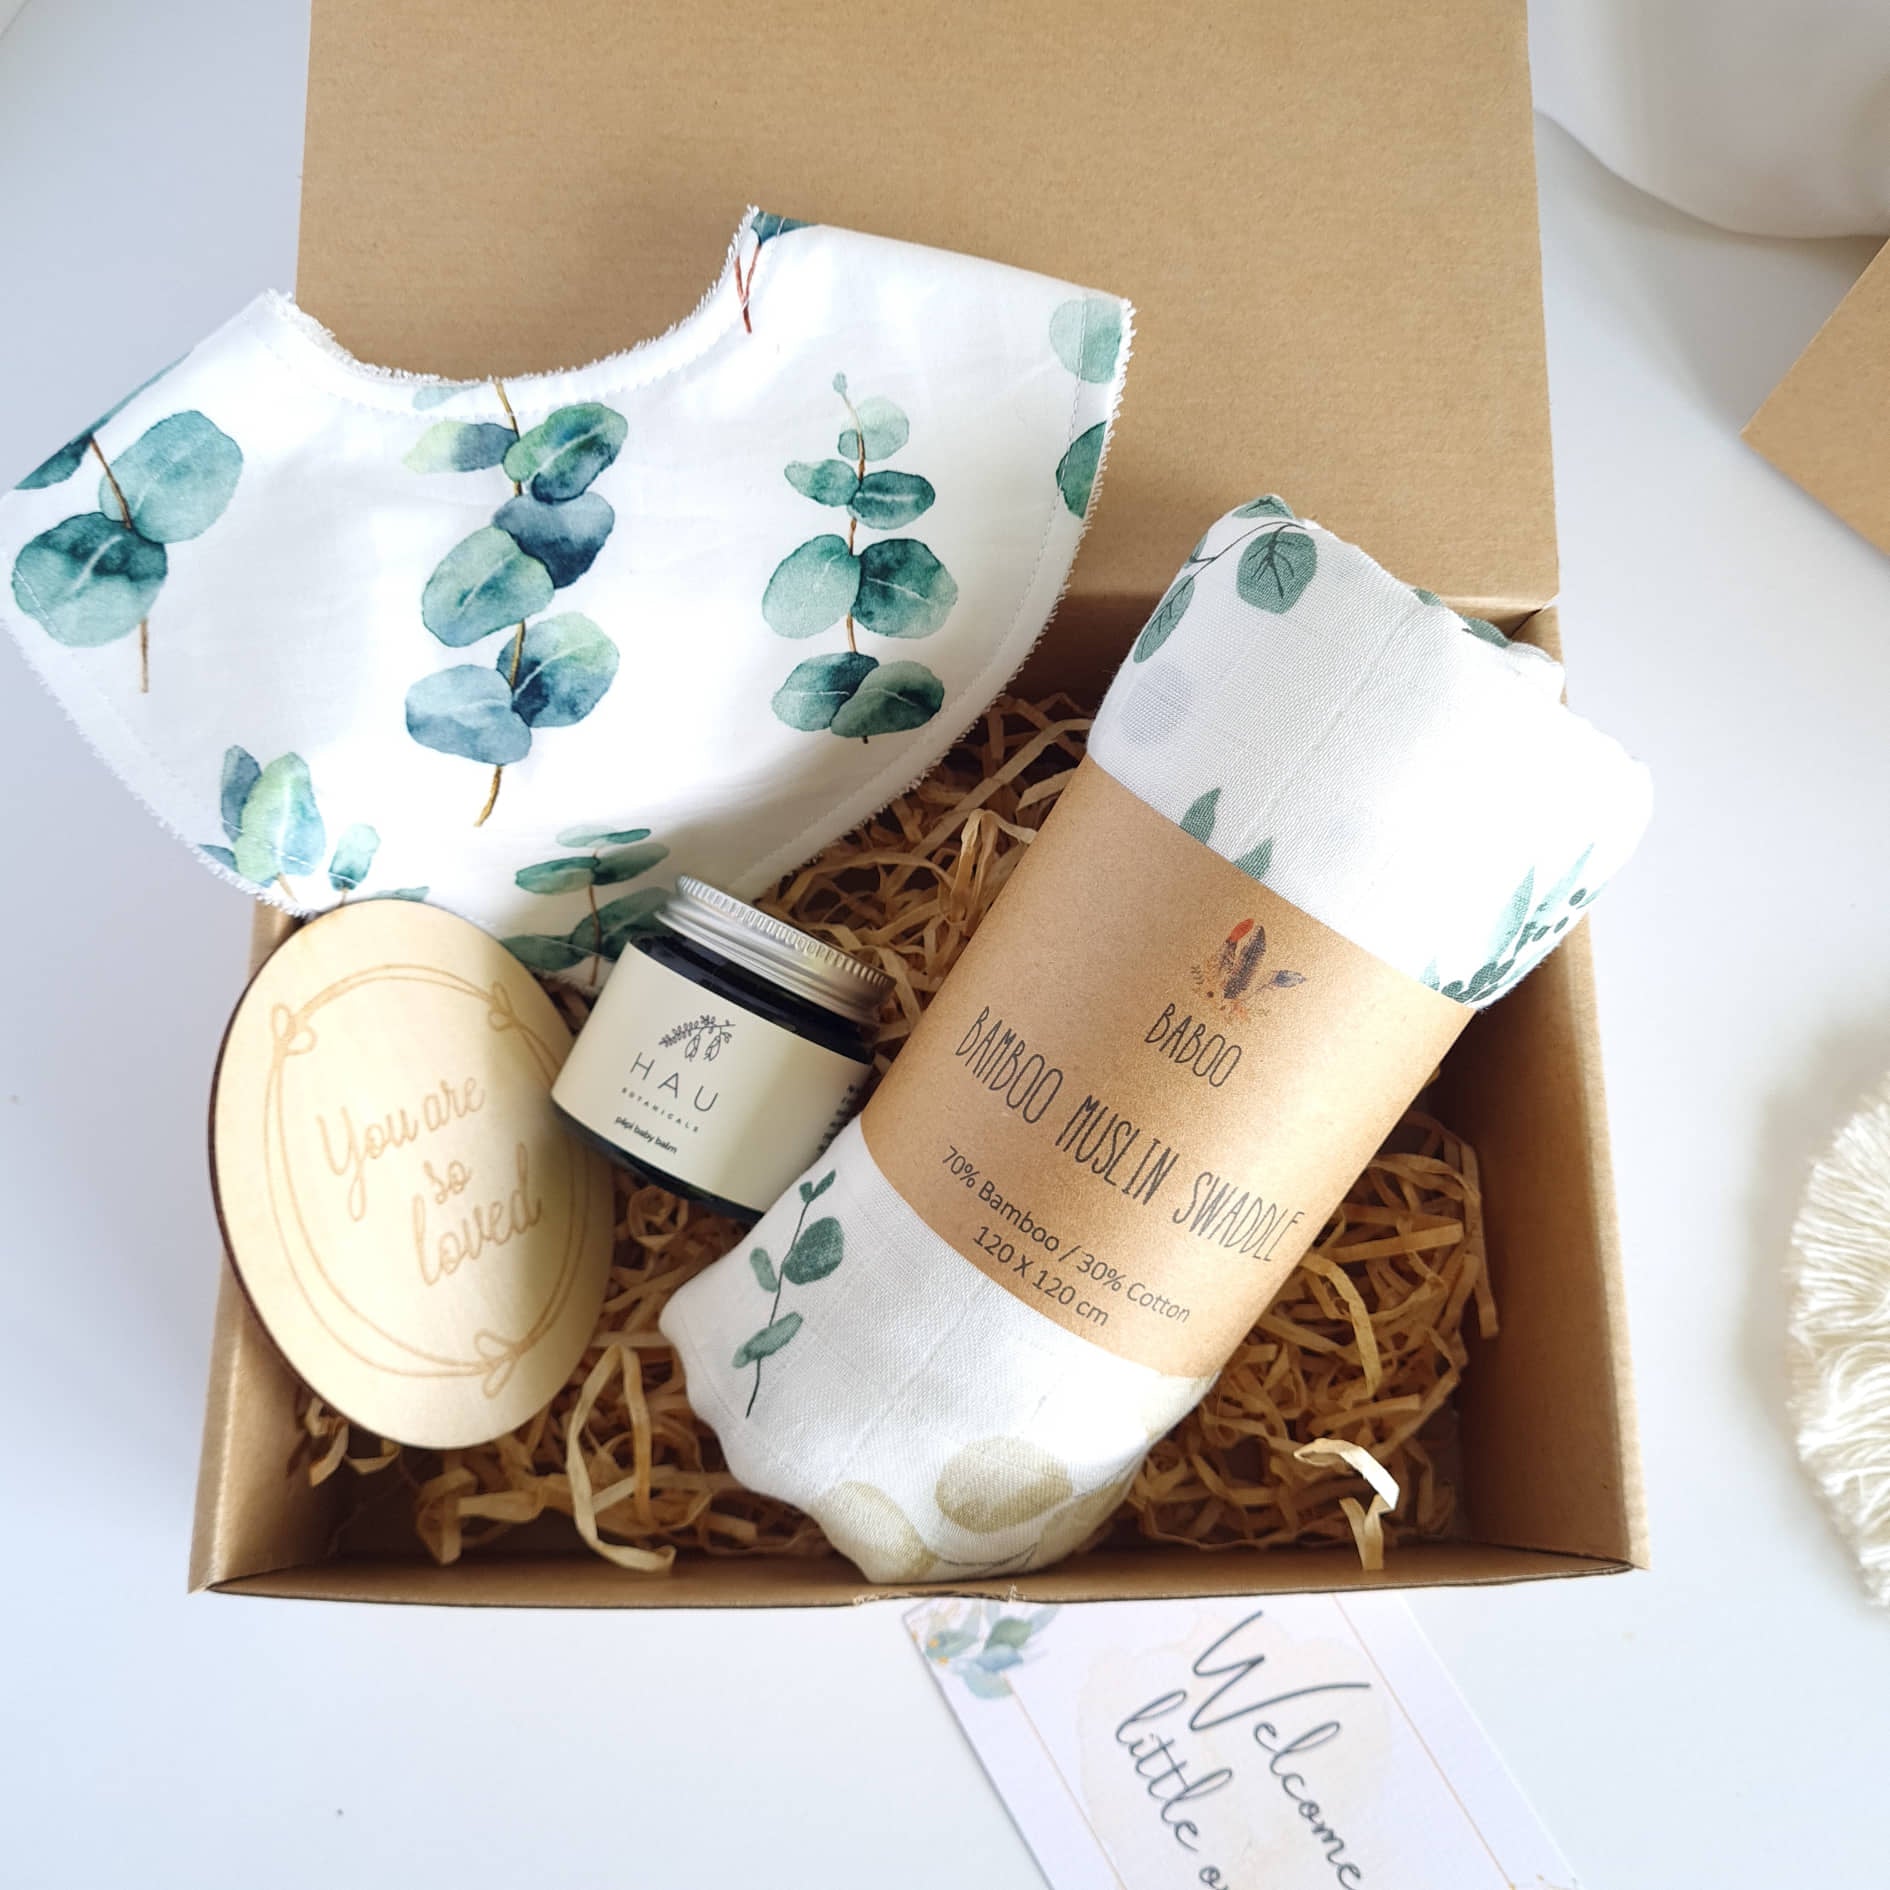 WELCOME LITTLE ONE  - Tyler Gift box